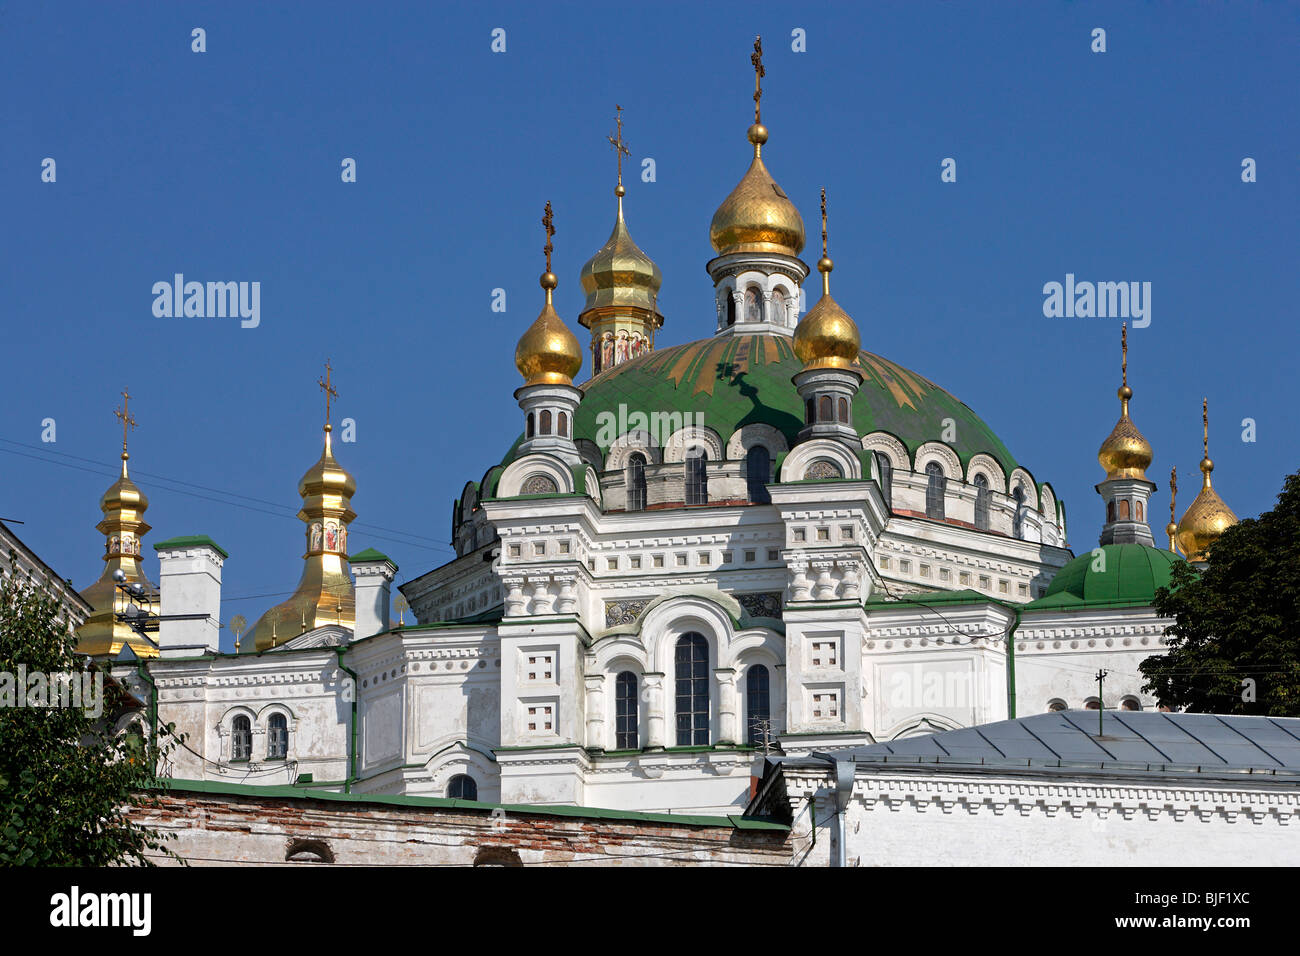 Kiev-Pechersk Lavra,Fratry church named after the Venerable Fathers Anthony and Theodosius,19th century,Kiev,Ukraine Stock Photo